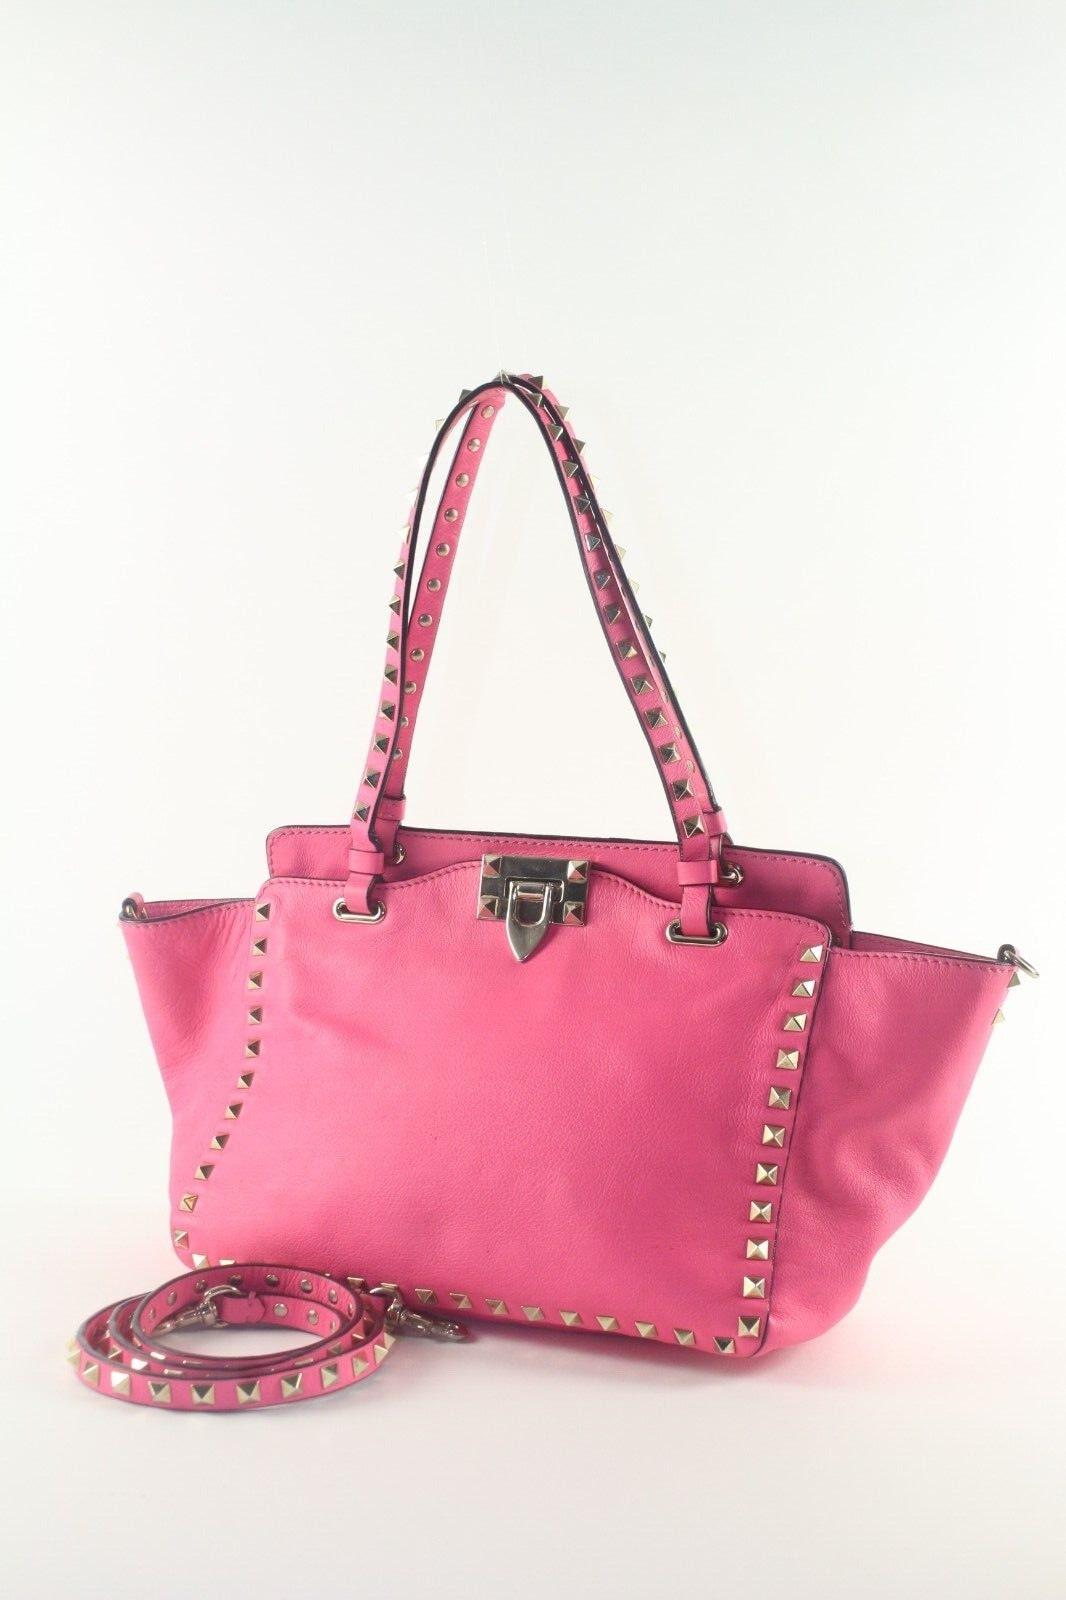 Valentino Hot Pink Rockstud 2way Tote Small 1VAL1129K
Date Code/Serial Number: BSG03BOL1

Made In: Italy

Measurements: Length:  15.5 